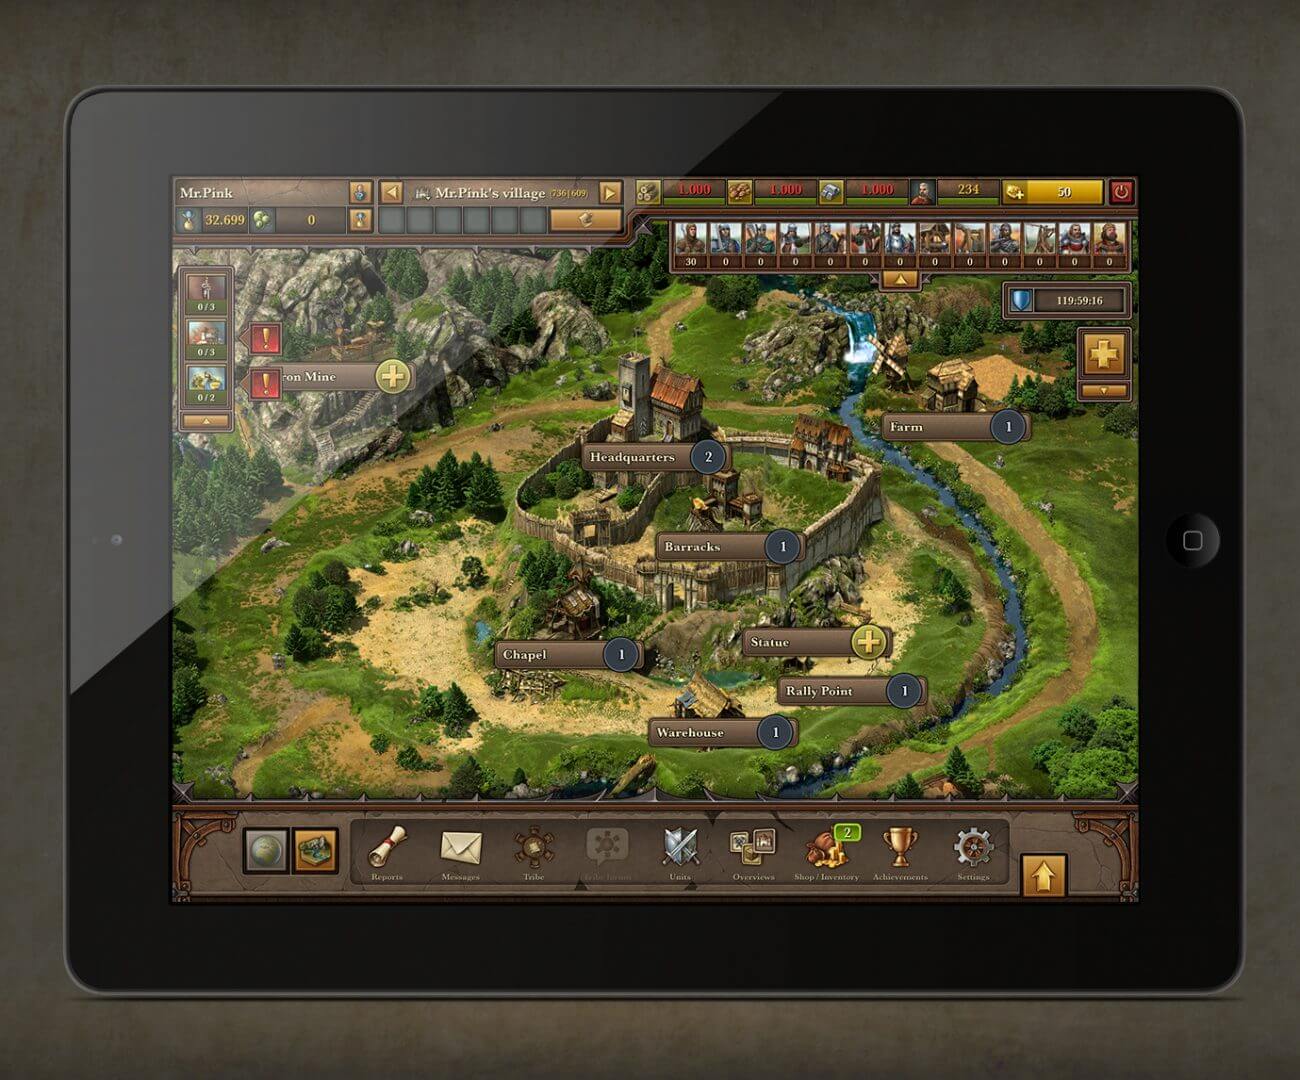 Tribal Wars 2 Game for Android - Download